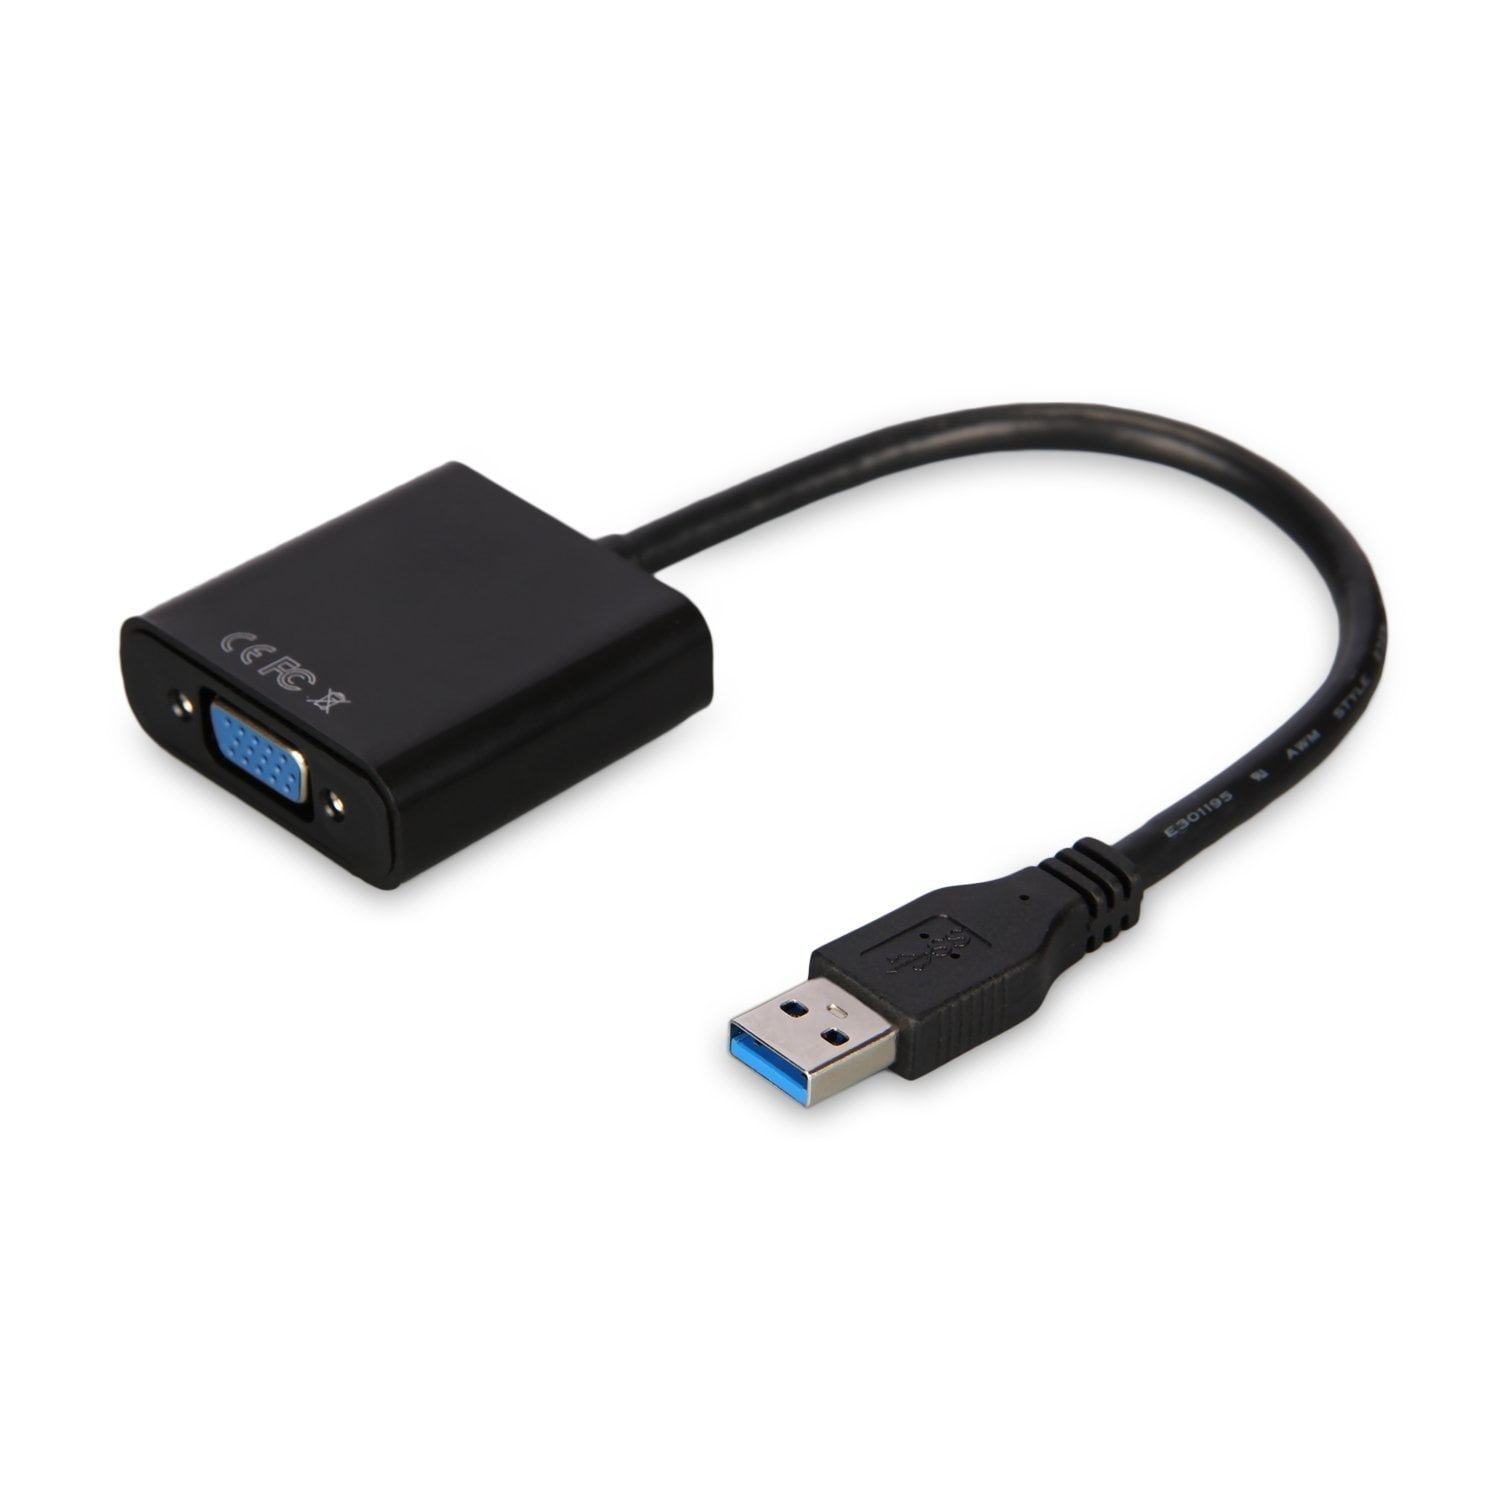 FrontTech USB3.0 to VGA Adapter, USB 3.0 Male to VGA Female Converter .